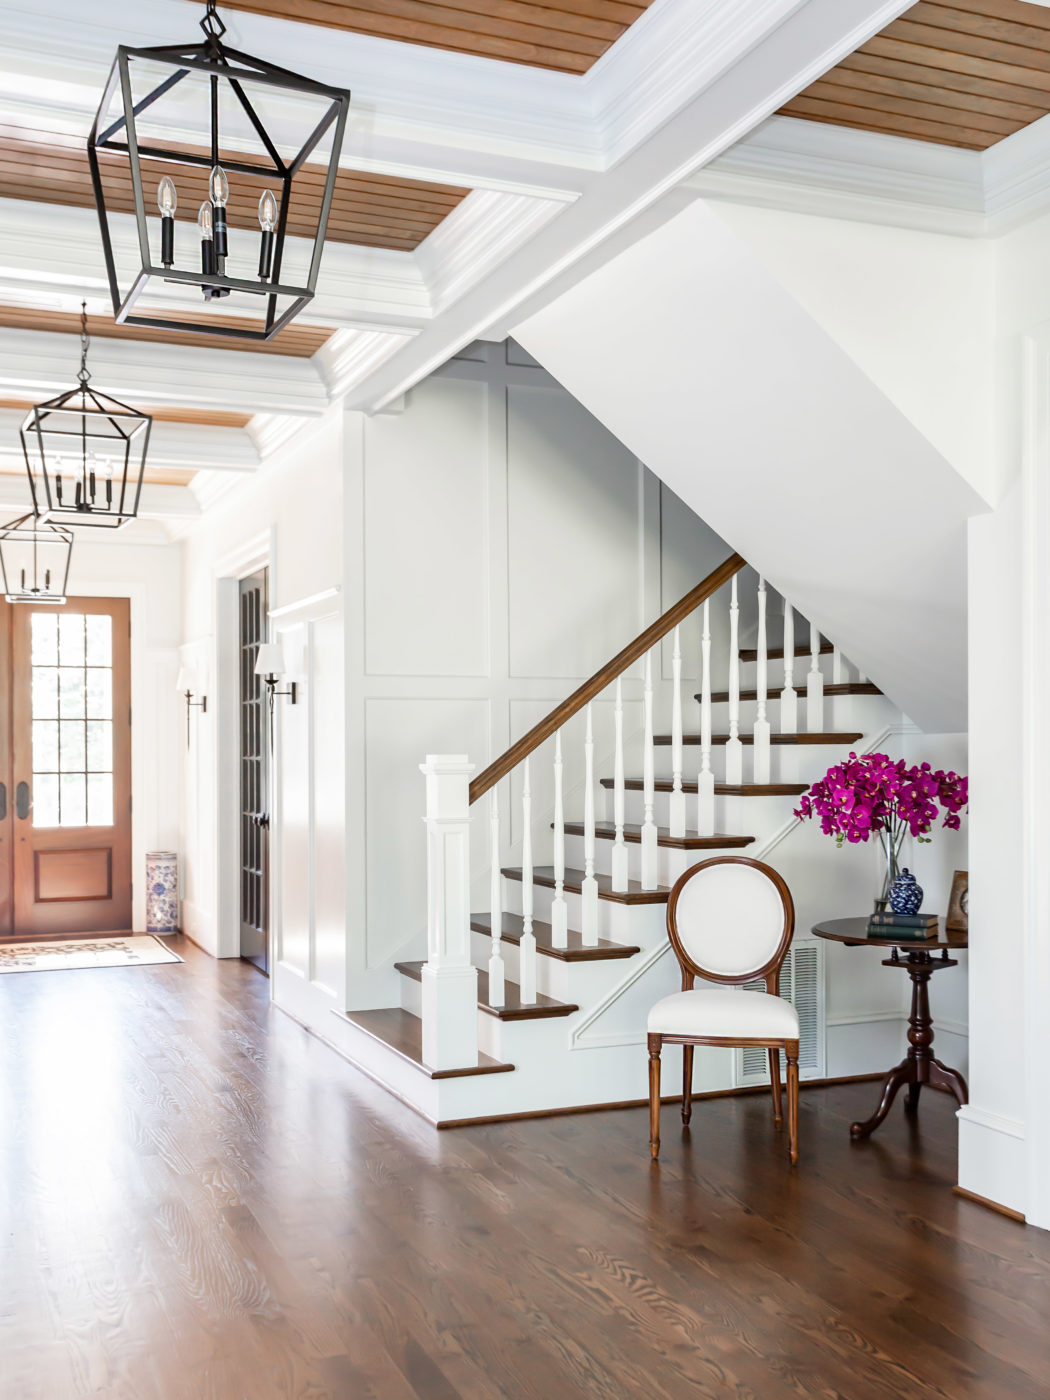 A new staircase in a custom luxury home inside the beltline of Raleigh, NC